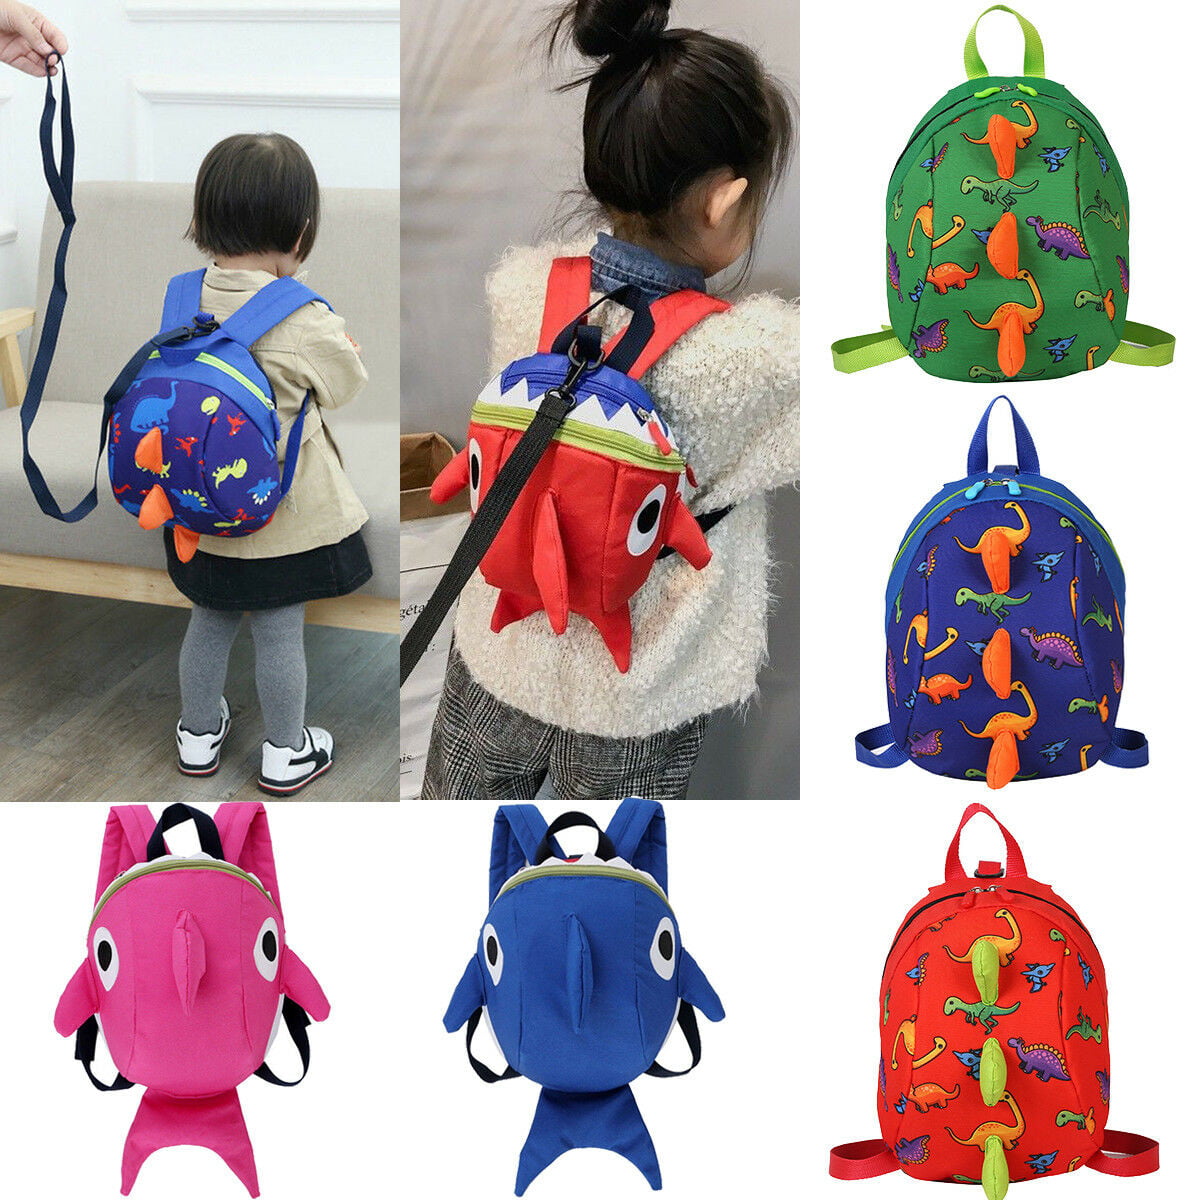 Kids Toddler Dog Doll Backpack Safety Anti-lost Harness w Leash NEW 